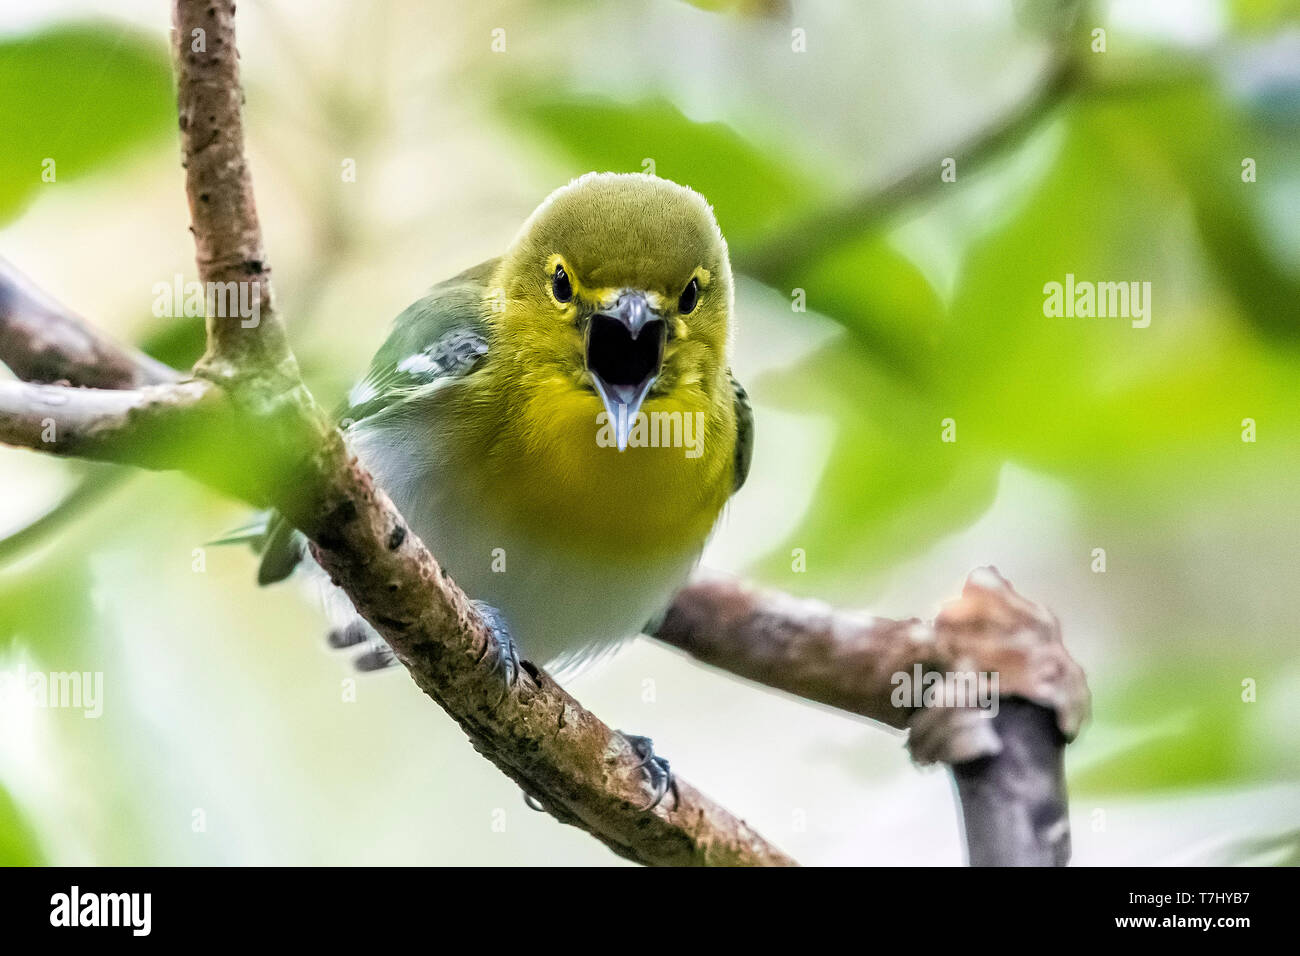 Yellow-throated Vireo perched on a laurel tree in the main Da Ponte, Corvo, Azores. October 16, 2018. Stock Photo